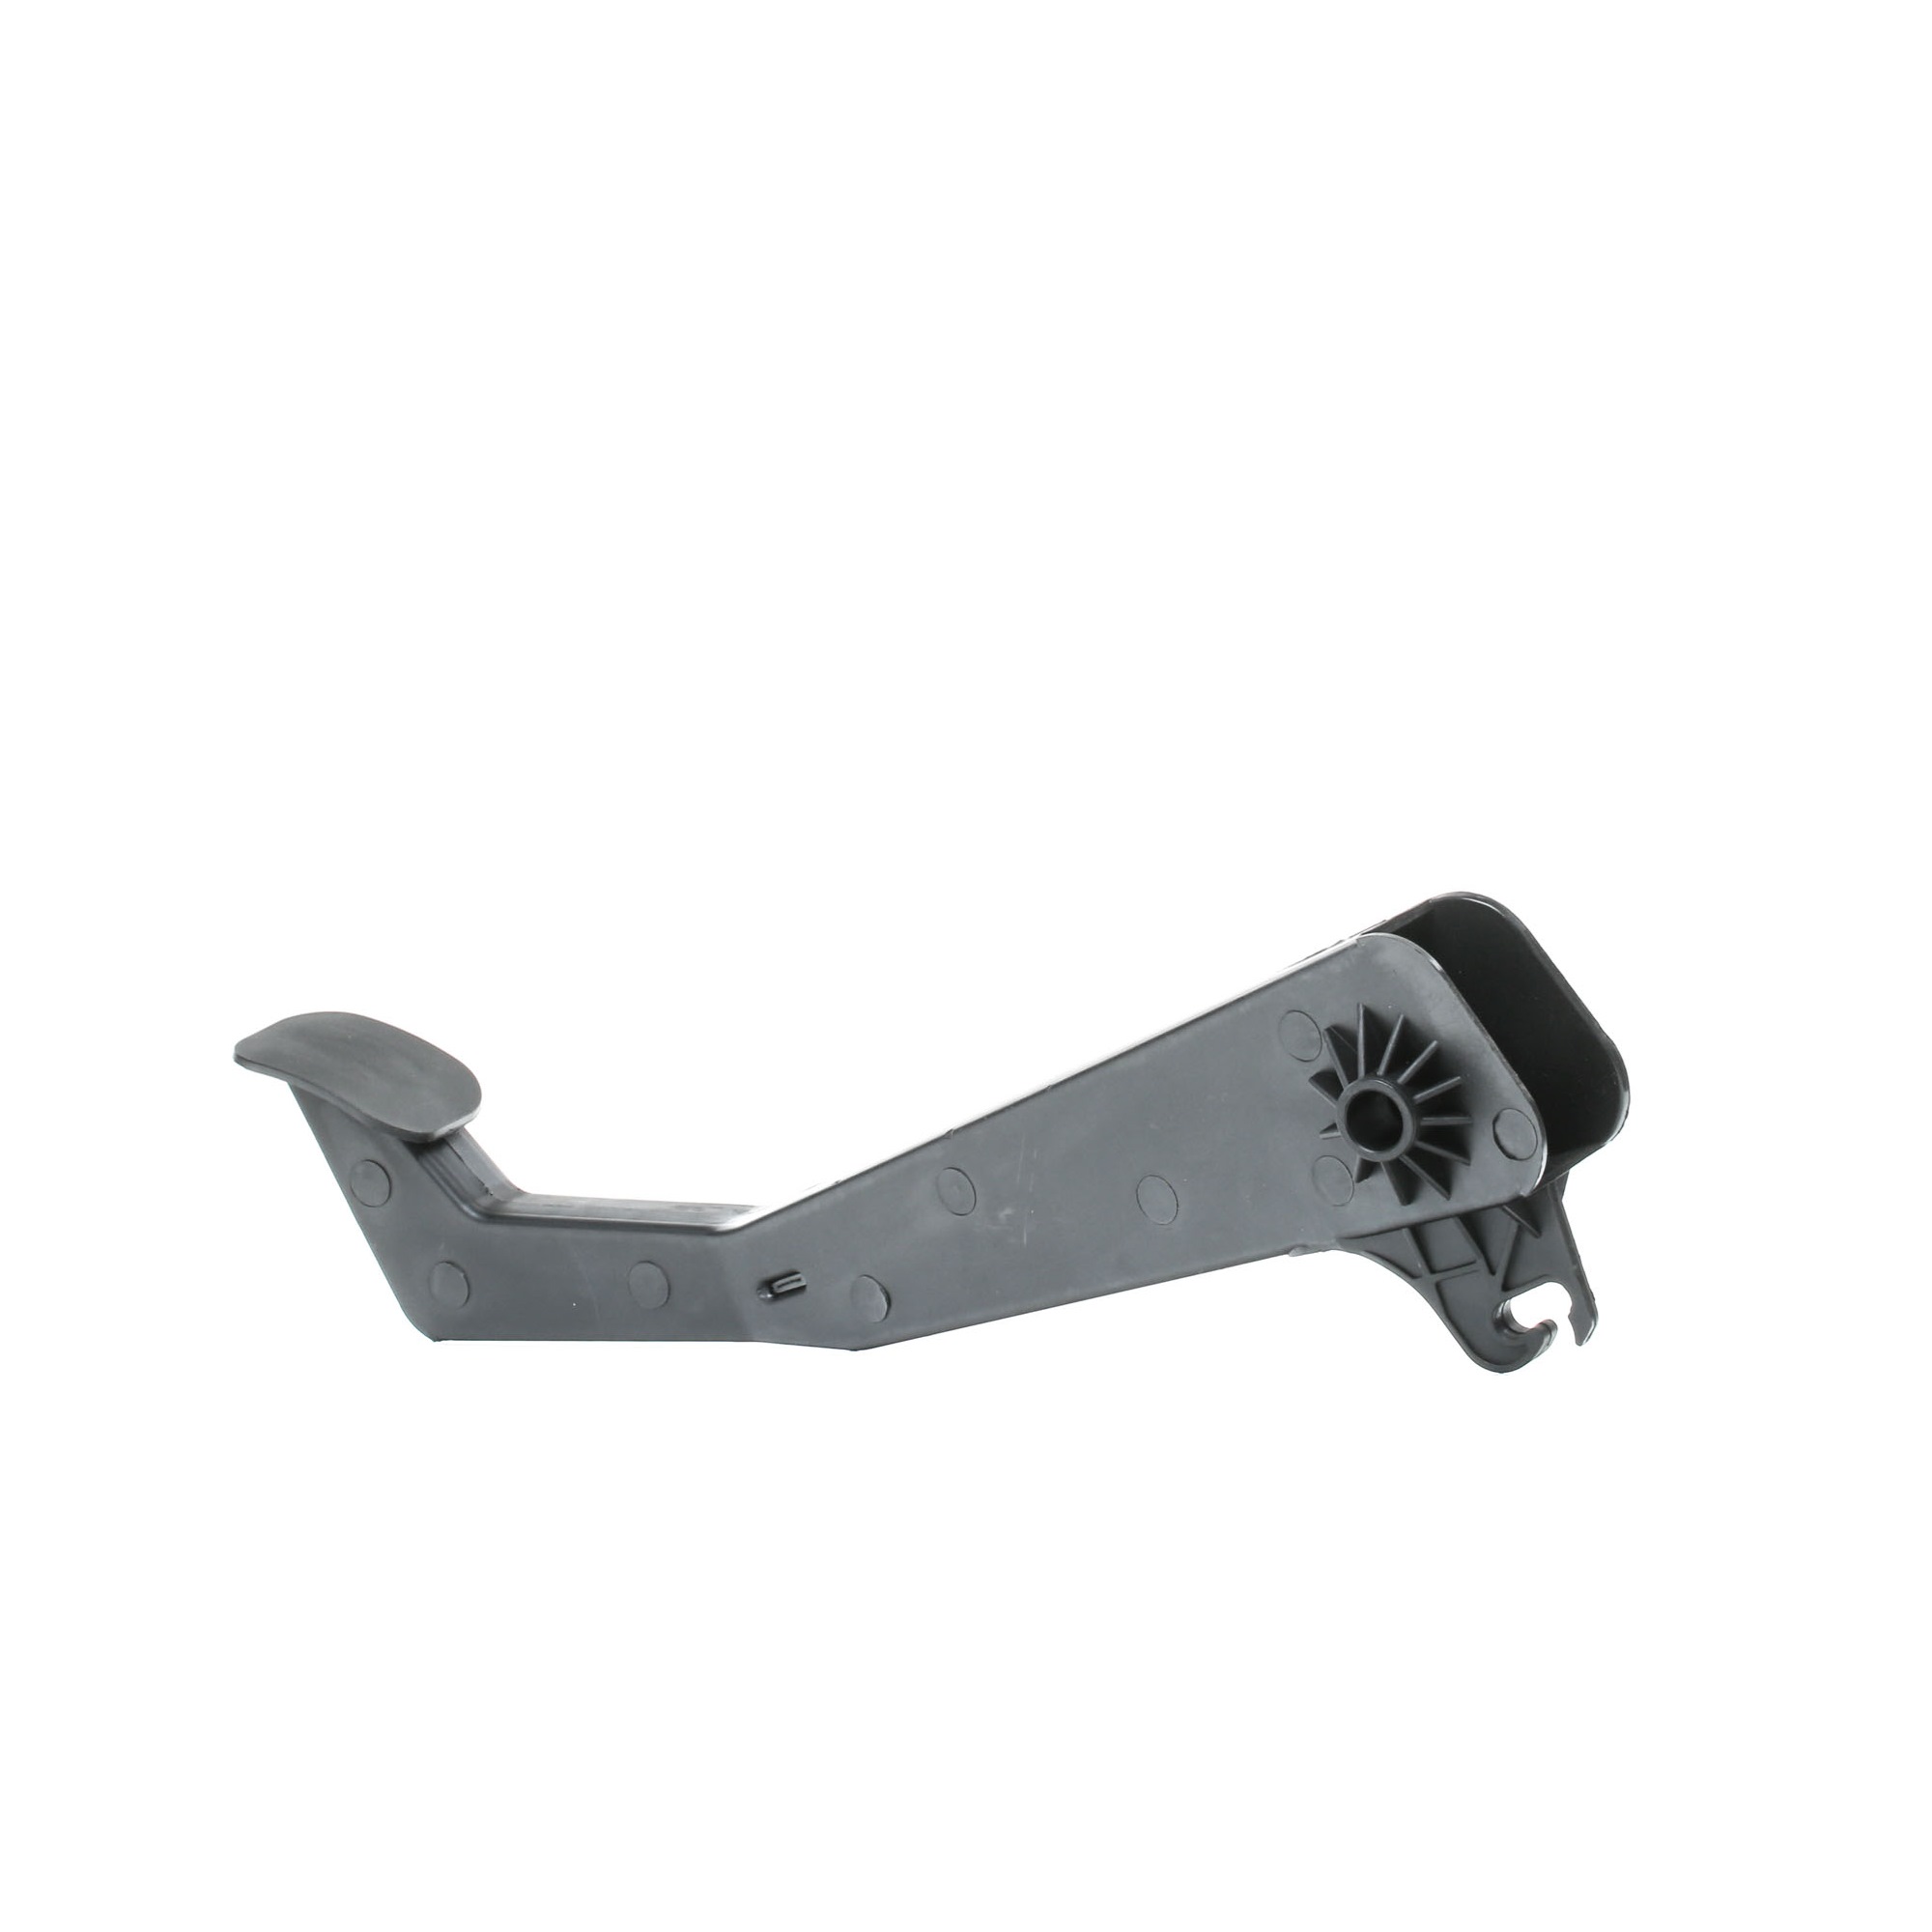 Daihatsu Clutch Pedal FAST FT70600 at a good price